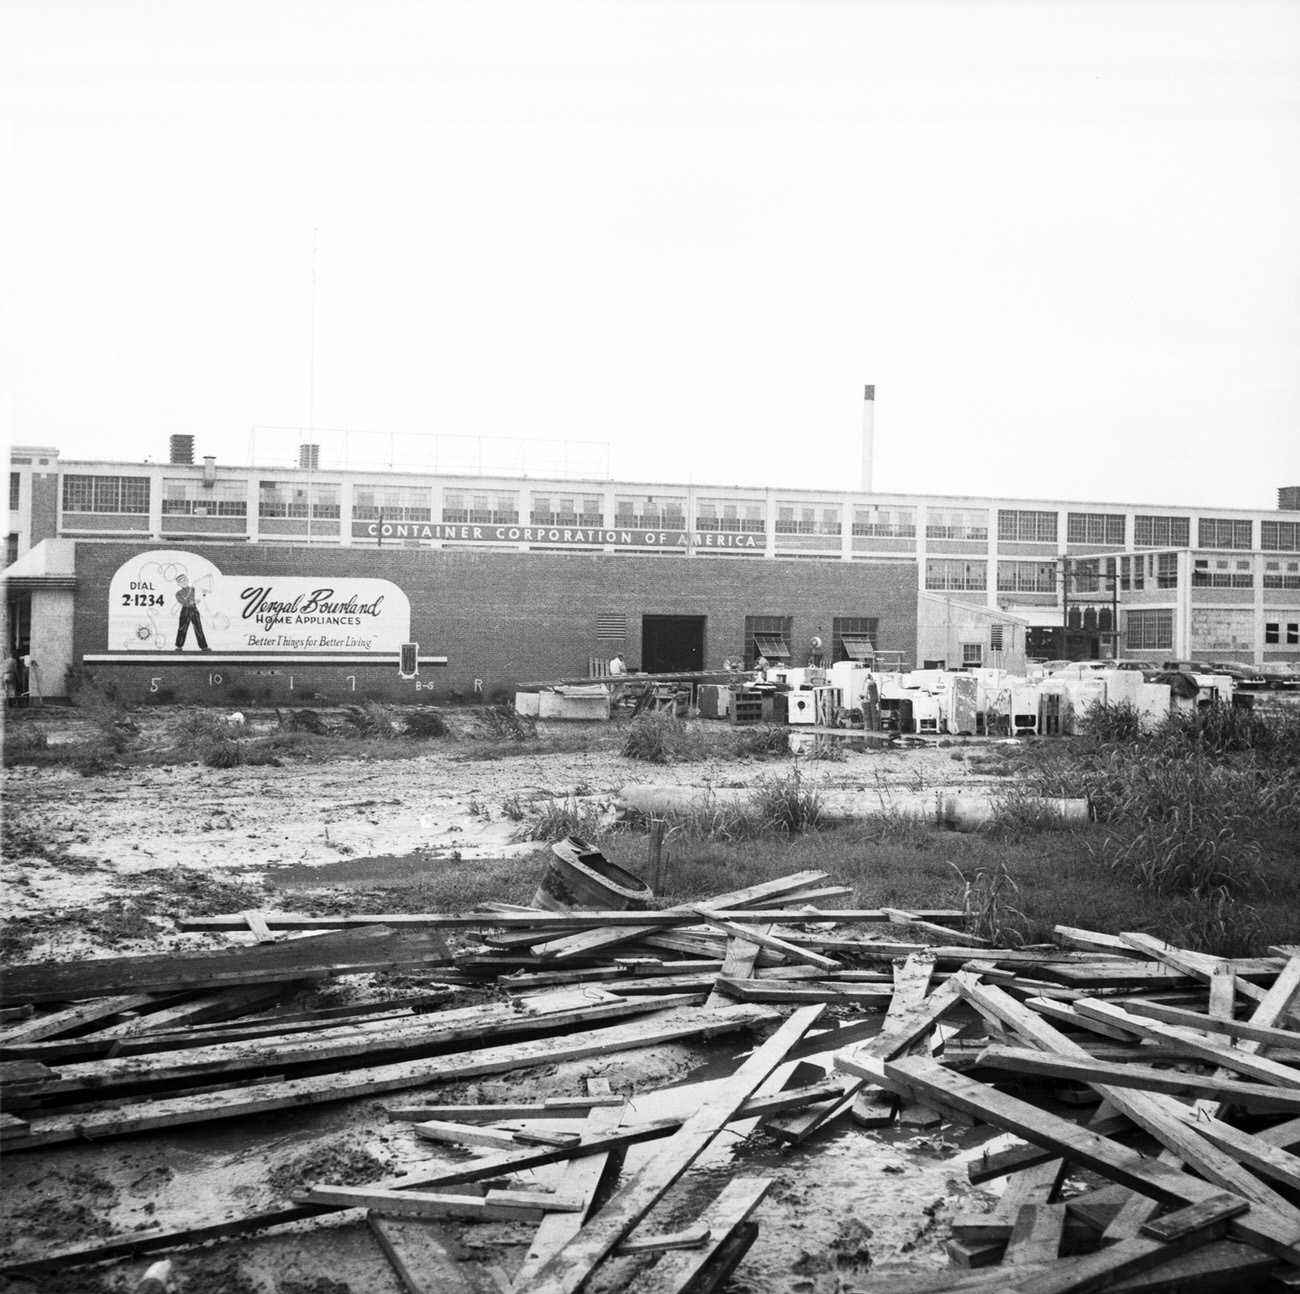 This photograph shows the Container Corporation of America building exterior after the 1949 Fort Worth flood.